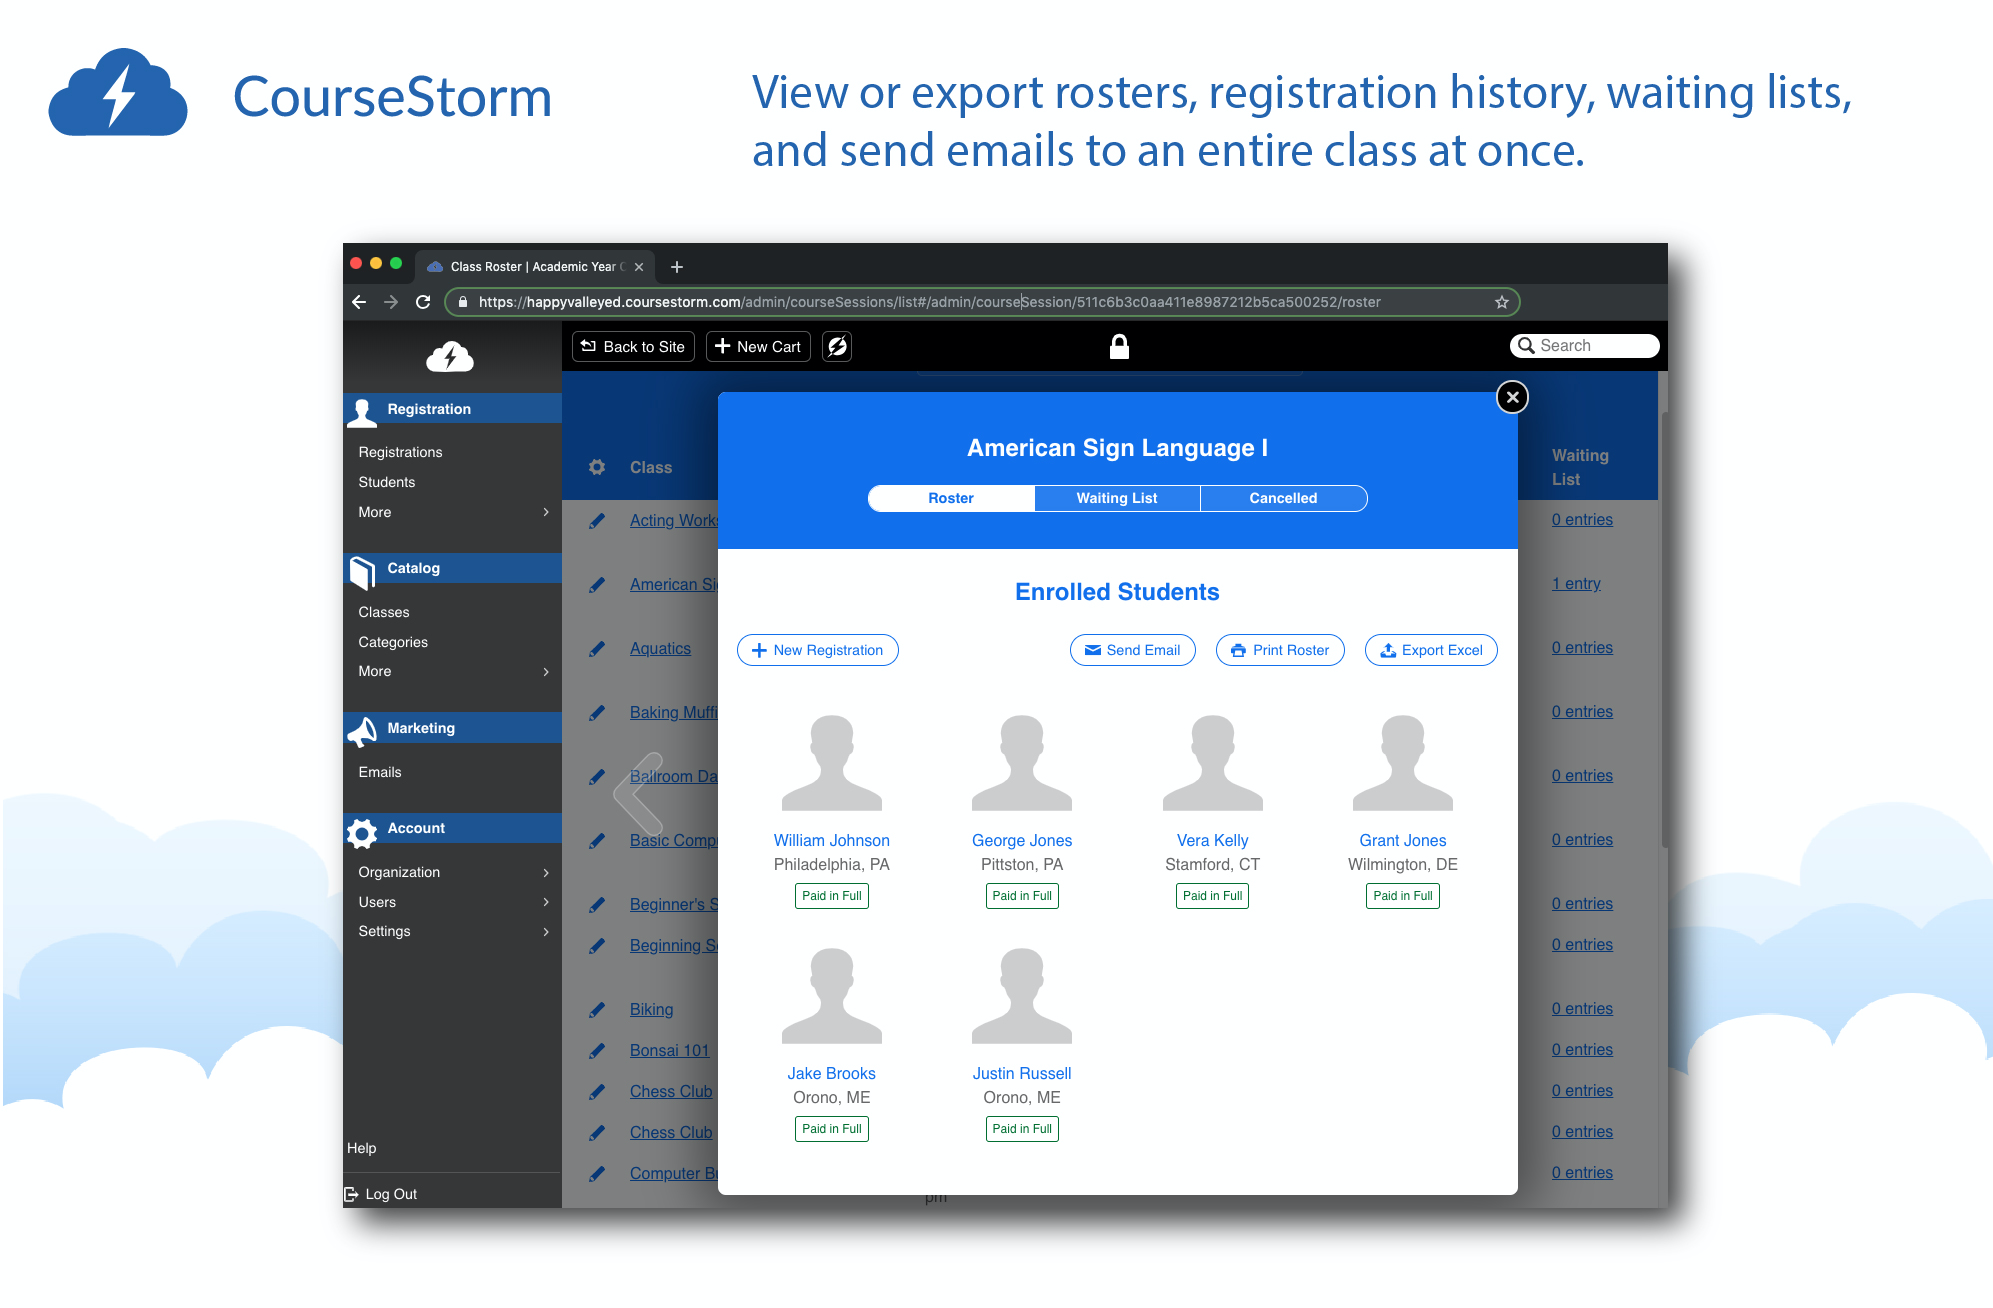 CourseStorm Software - View or export rosters, registration history, waiting lists, and send emails to an entire class at once.